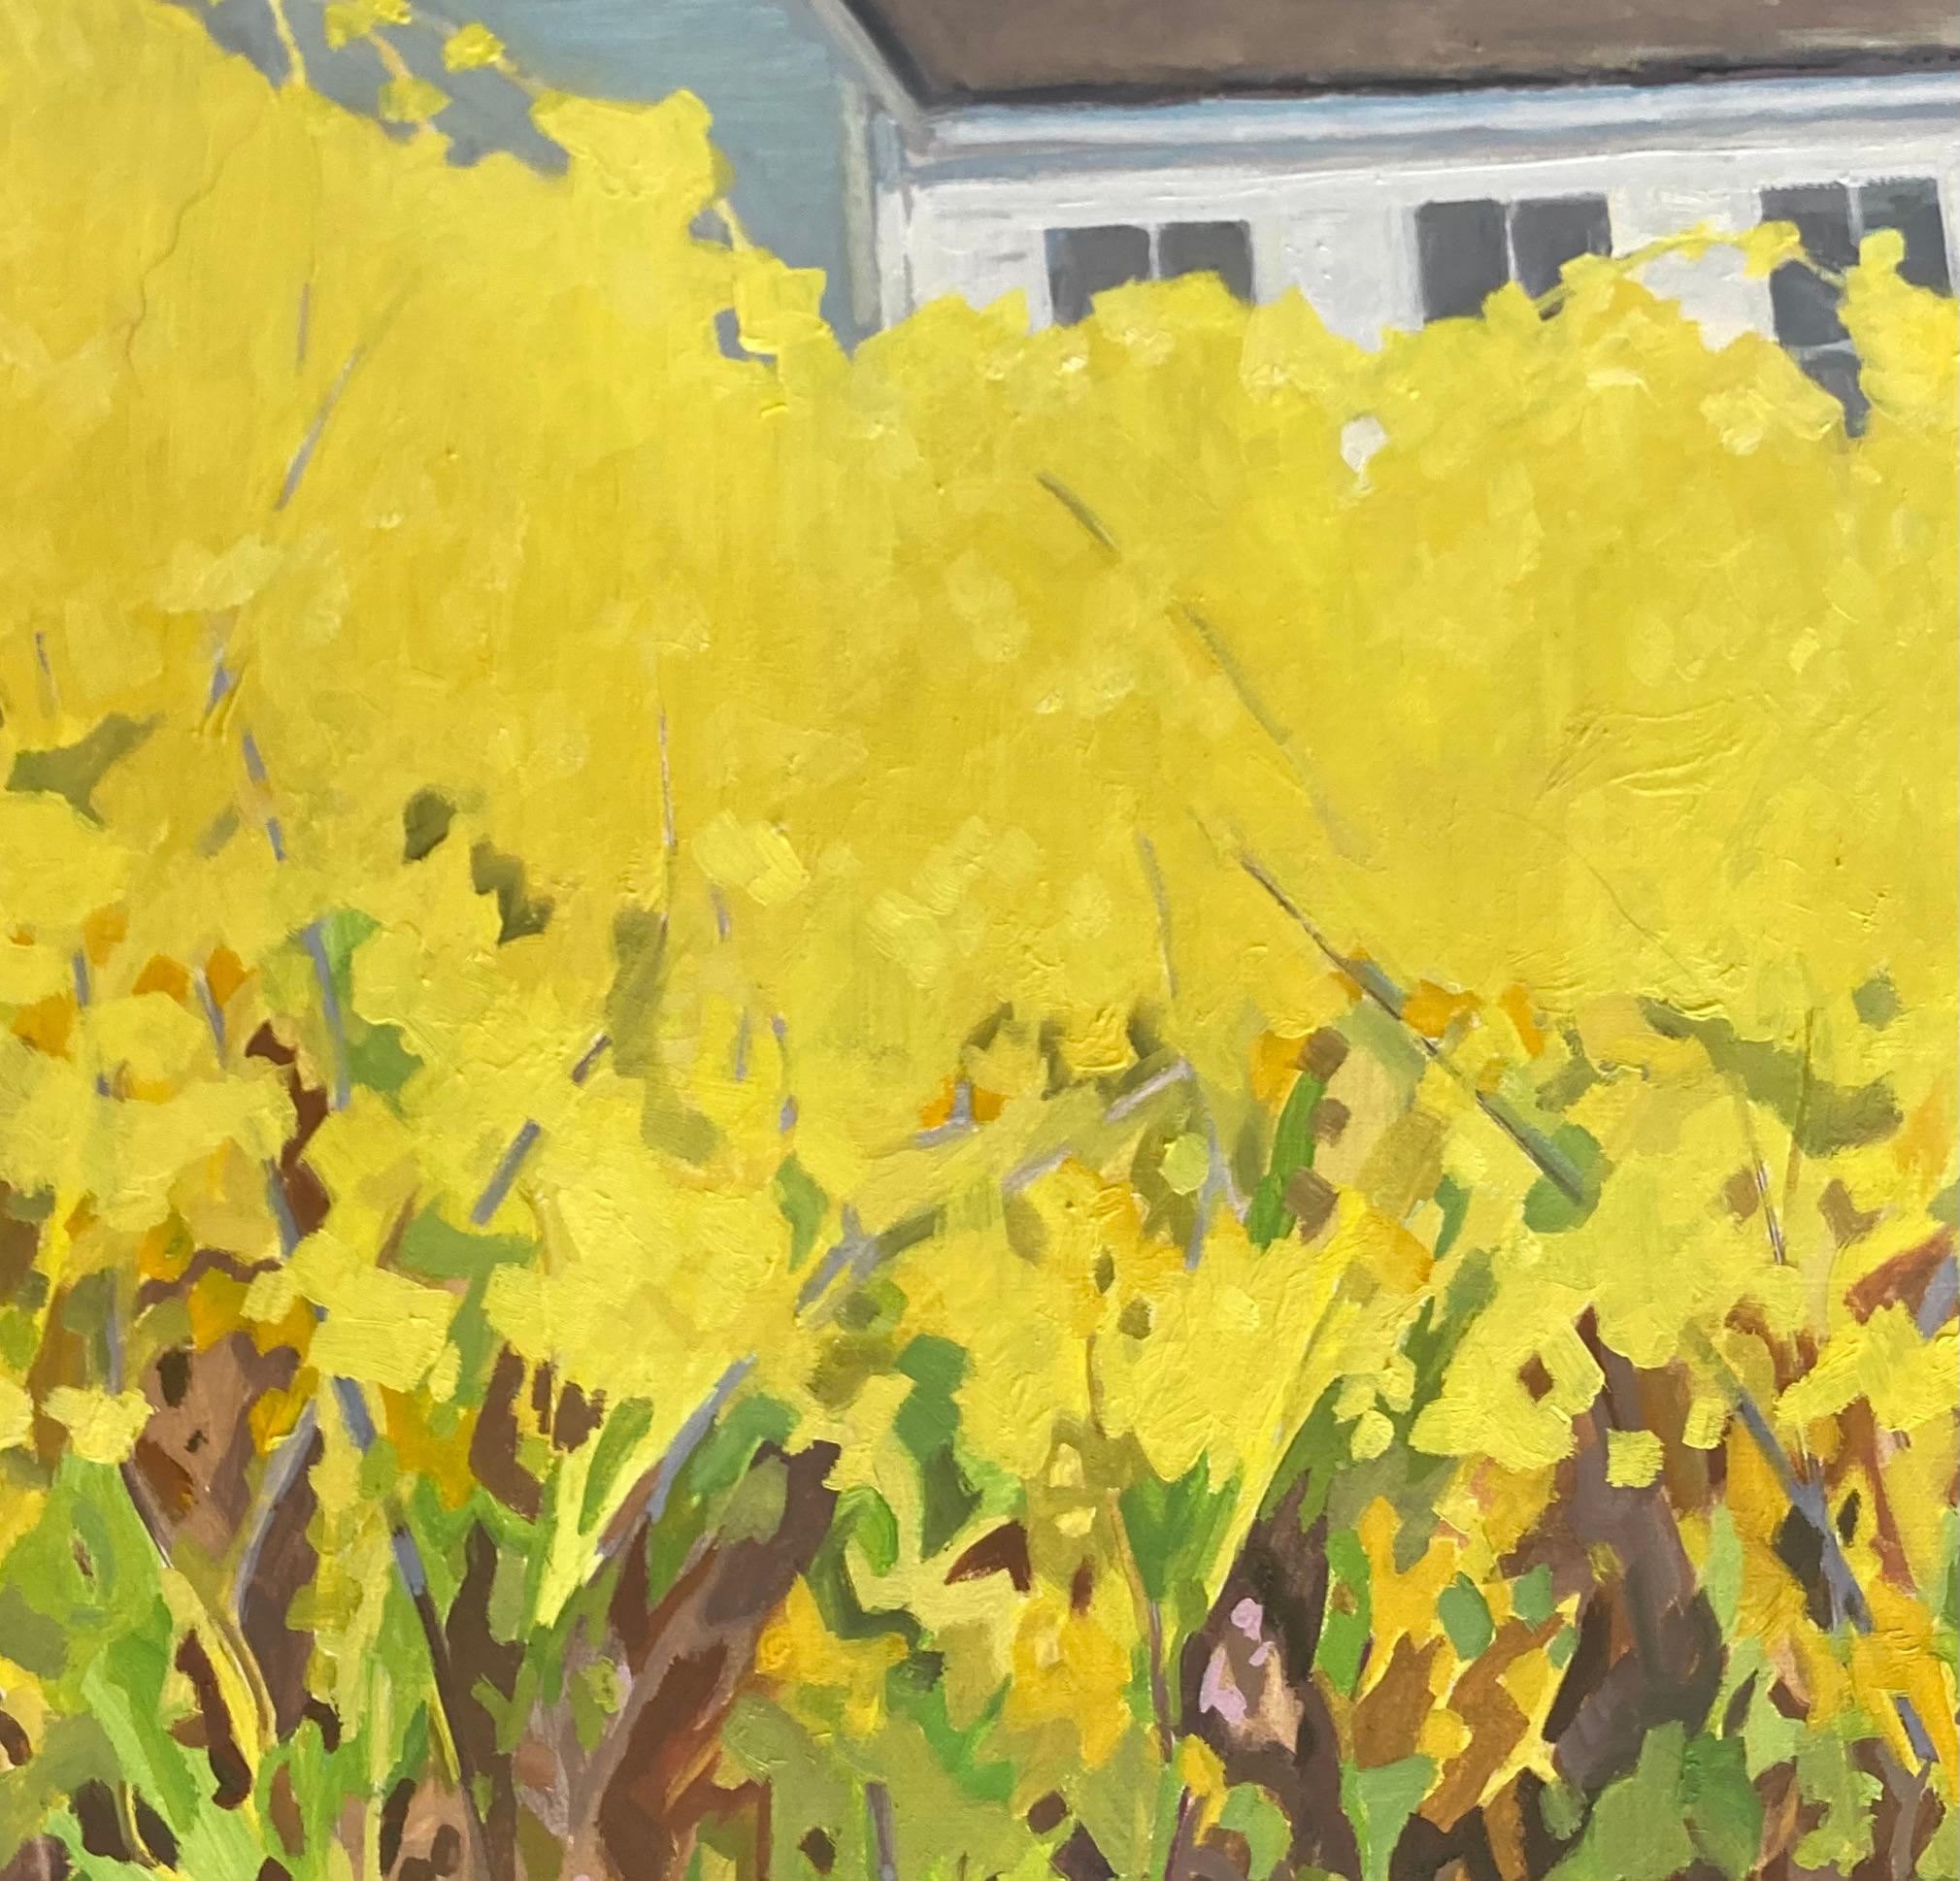 A peaceful spring landscape with a white house and chimney just visible over a yellow forsythia hedgerow against a serene, bright blue sky. Signed, dated and titled on verso.

KK Kozik is a landscape painter, a figurative painter, and an